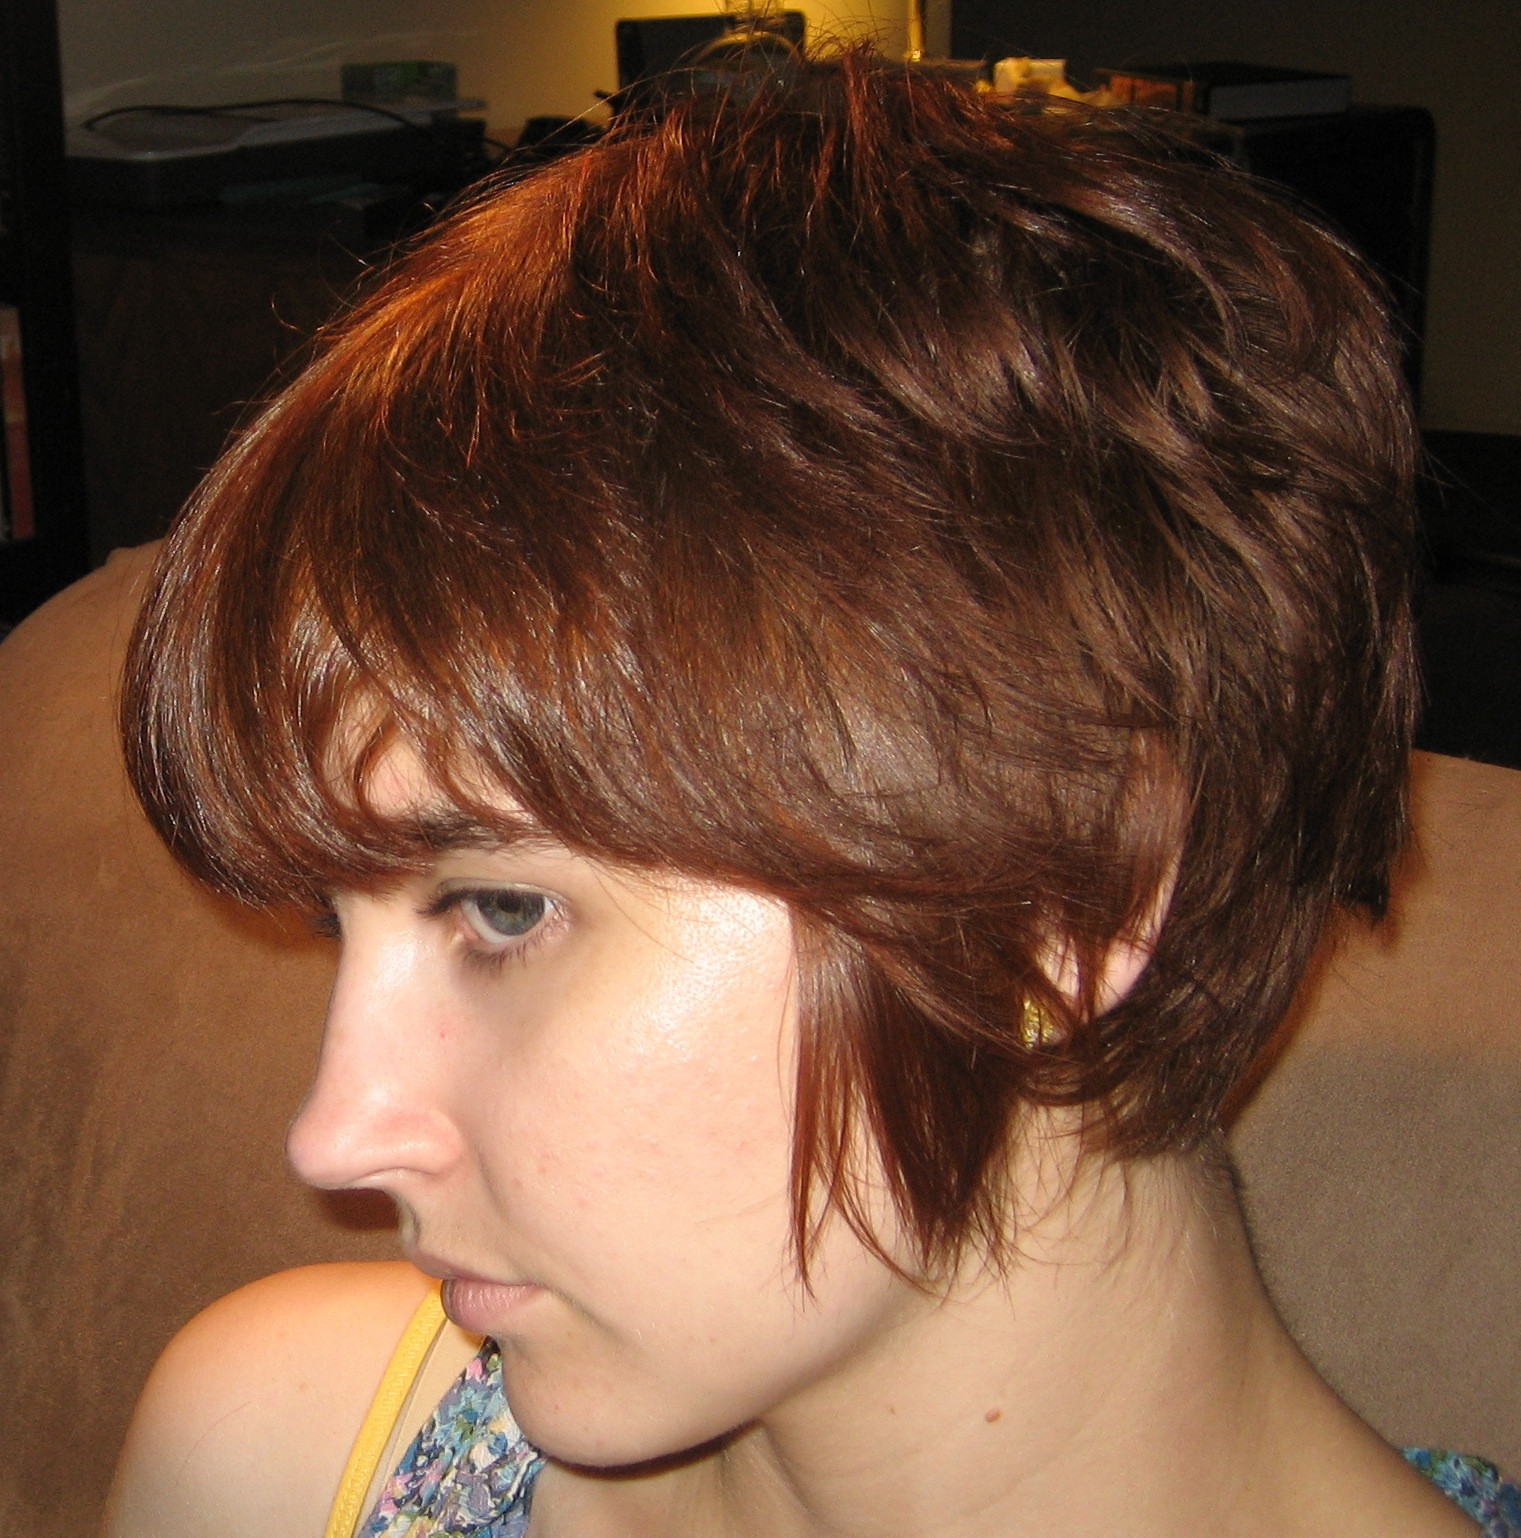 Hairstyles While Growing Out Short Hair
 Short Hair Growing Out With